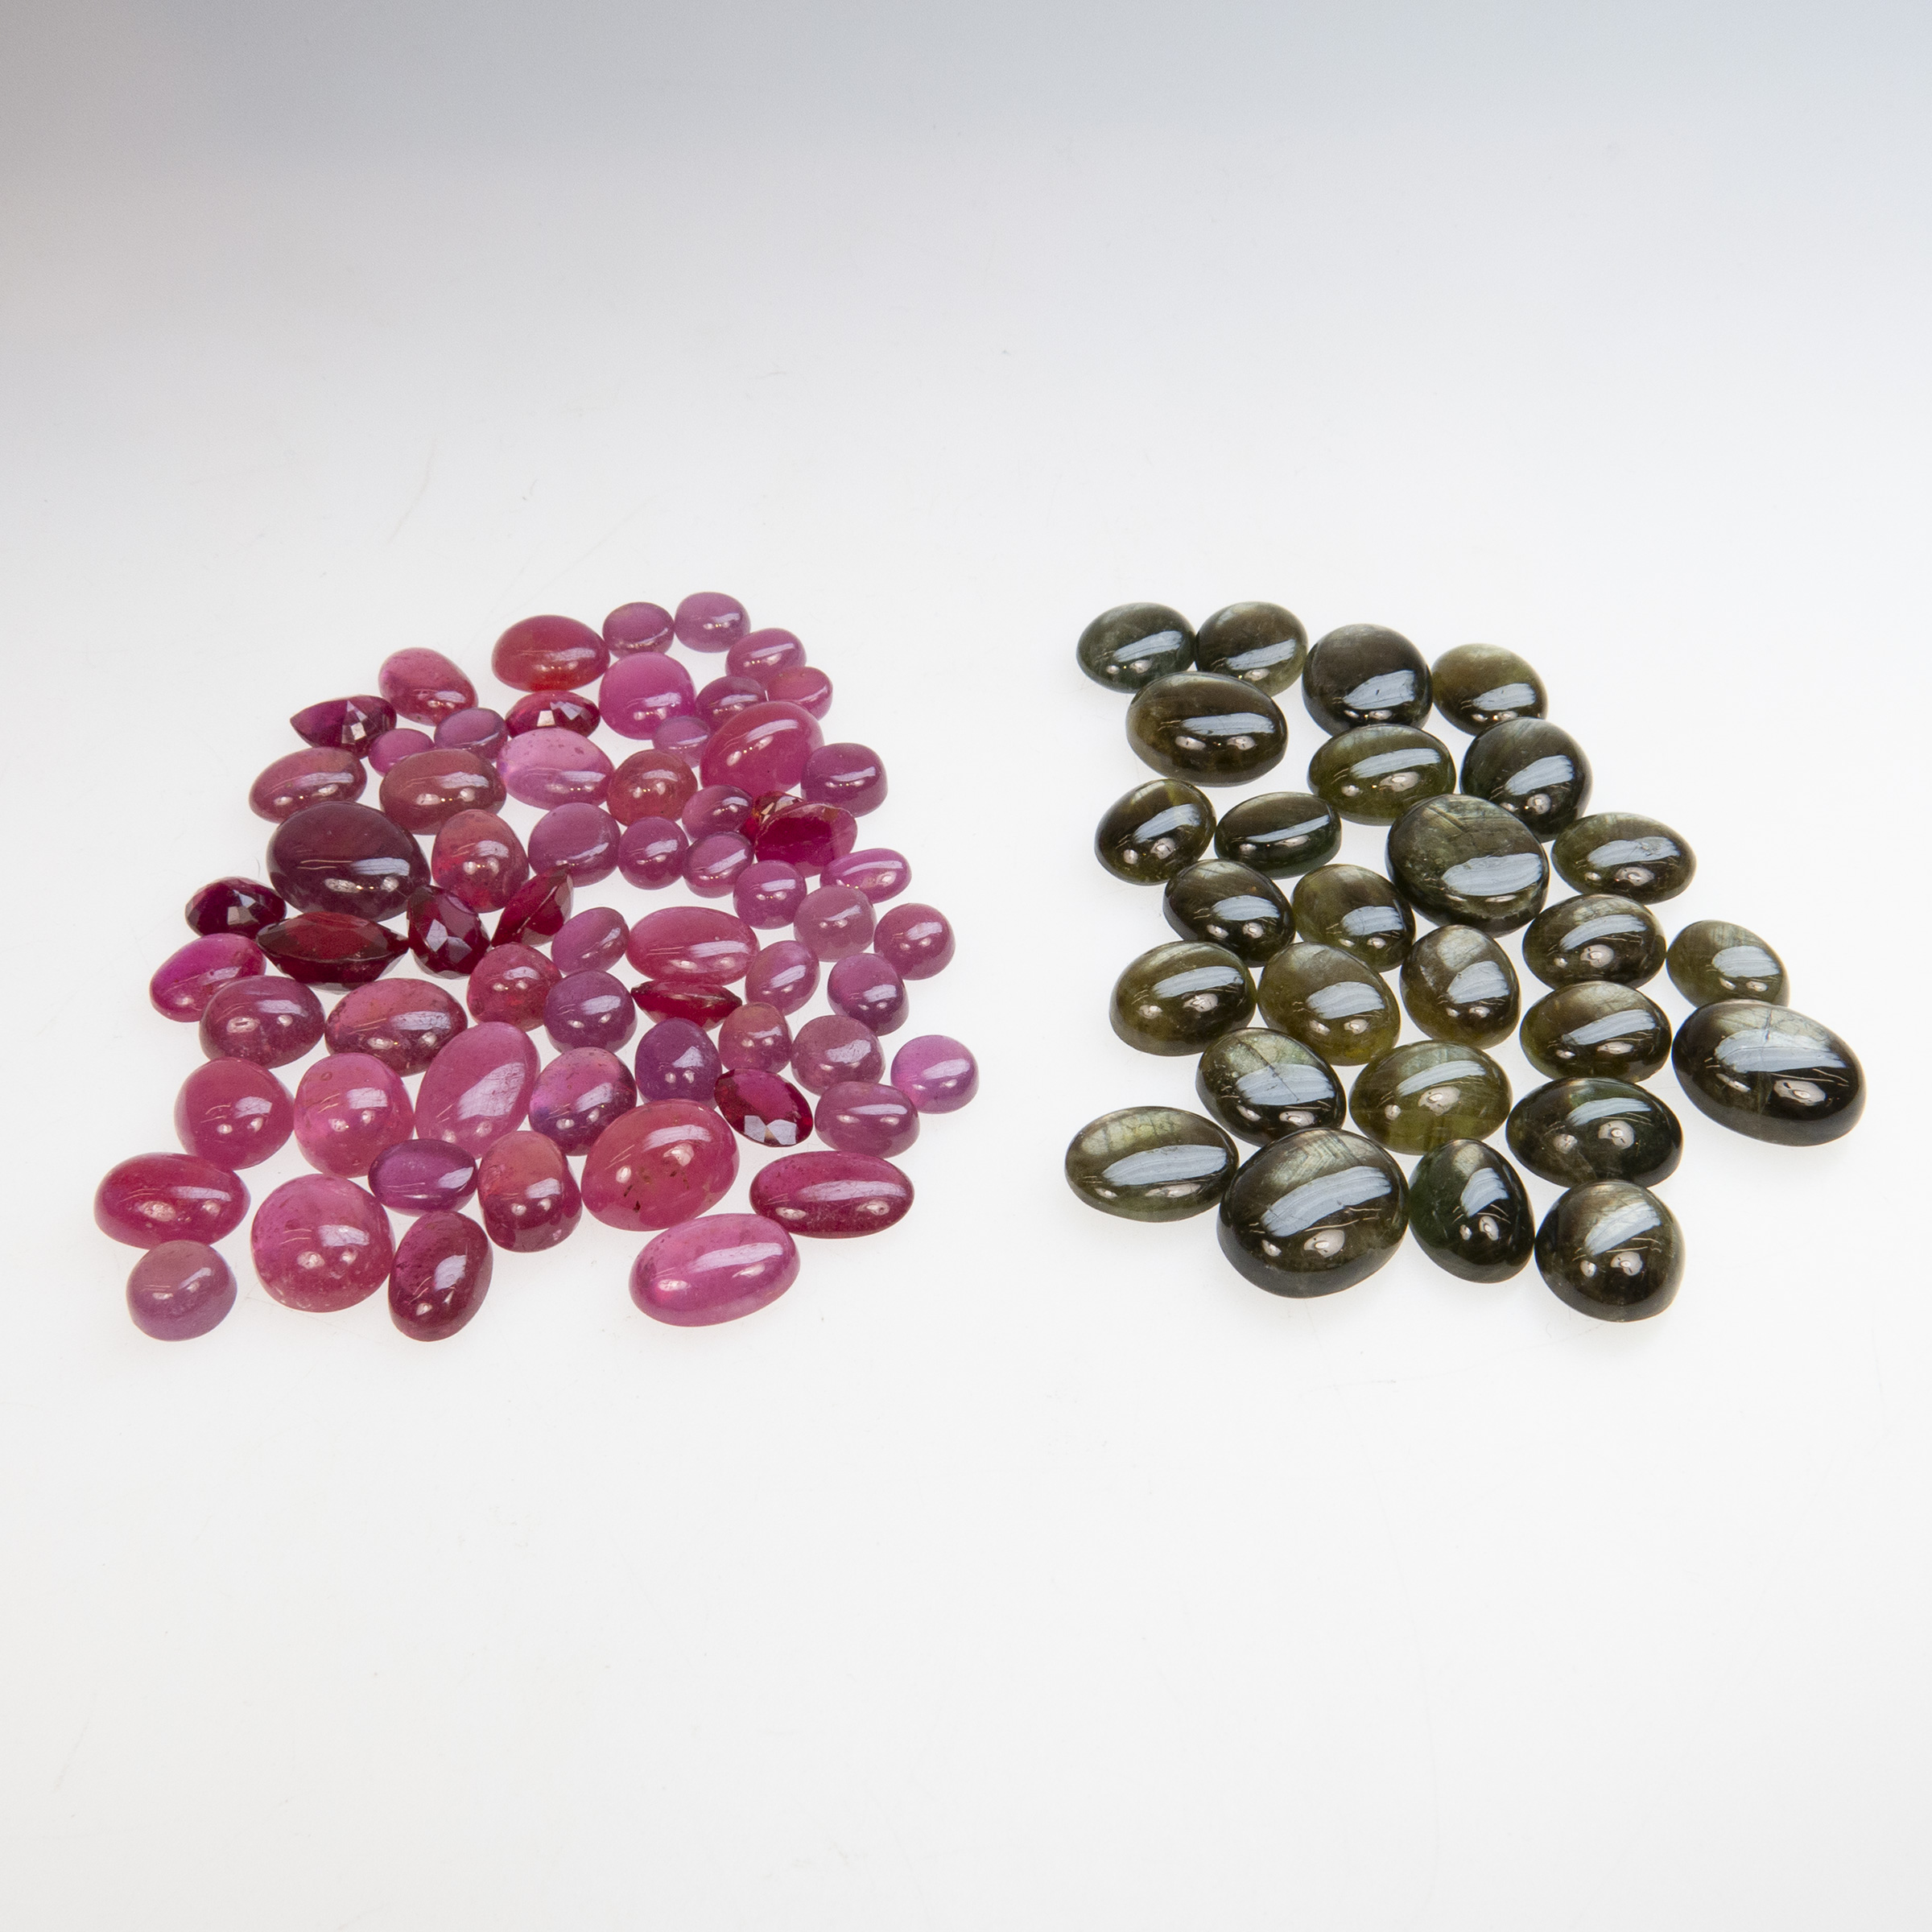 Quantity Of Unmounted Black Sapphire Cabochons And Glass-Filled Rubies